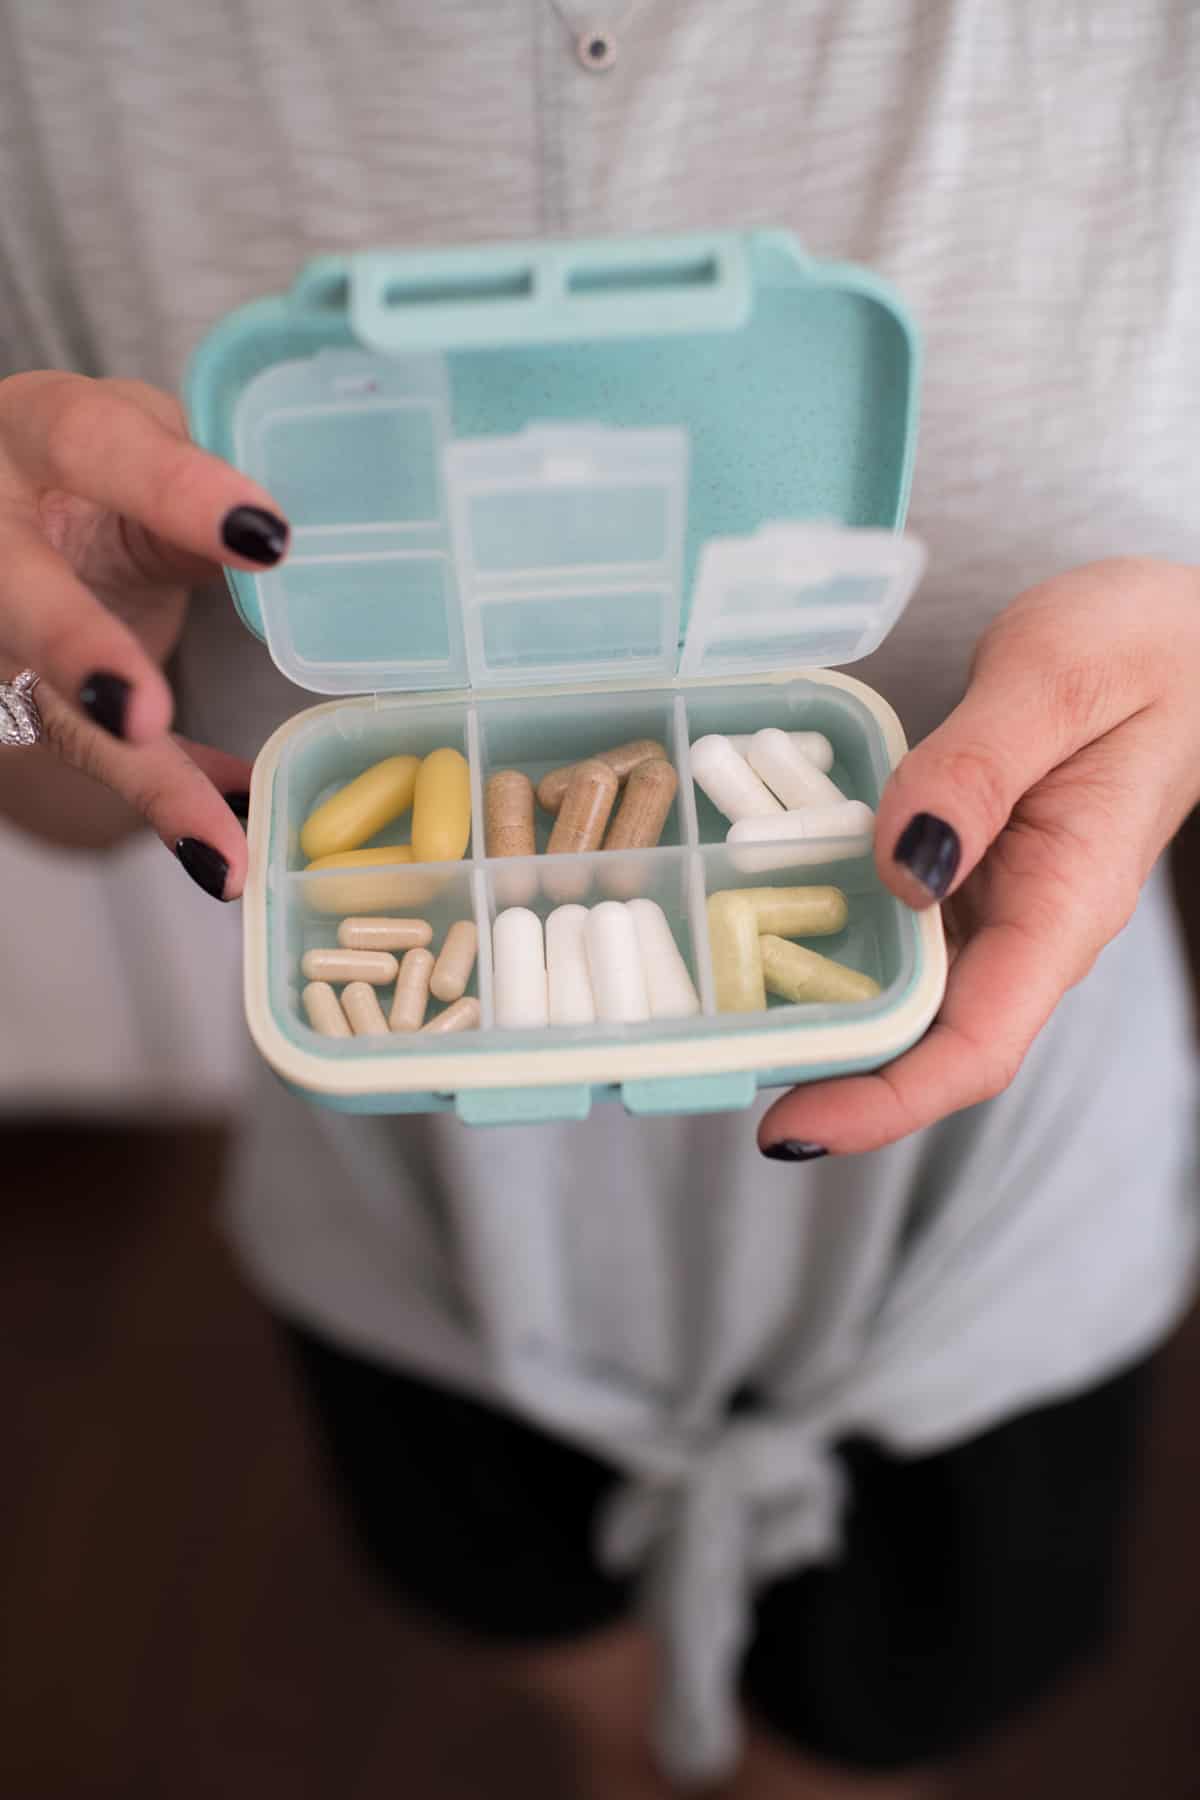 Supplements in a travel case